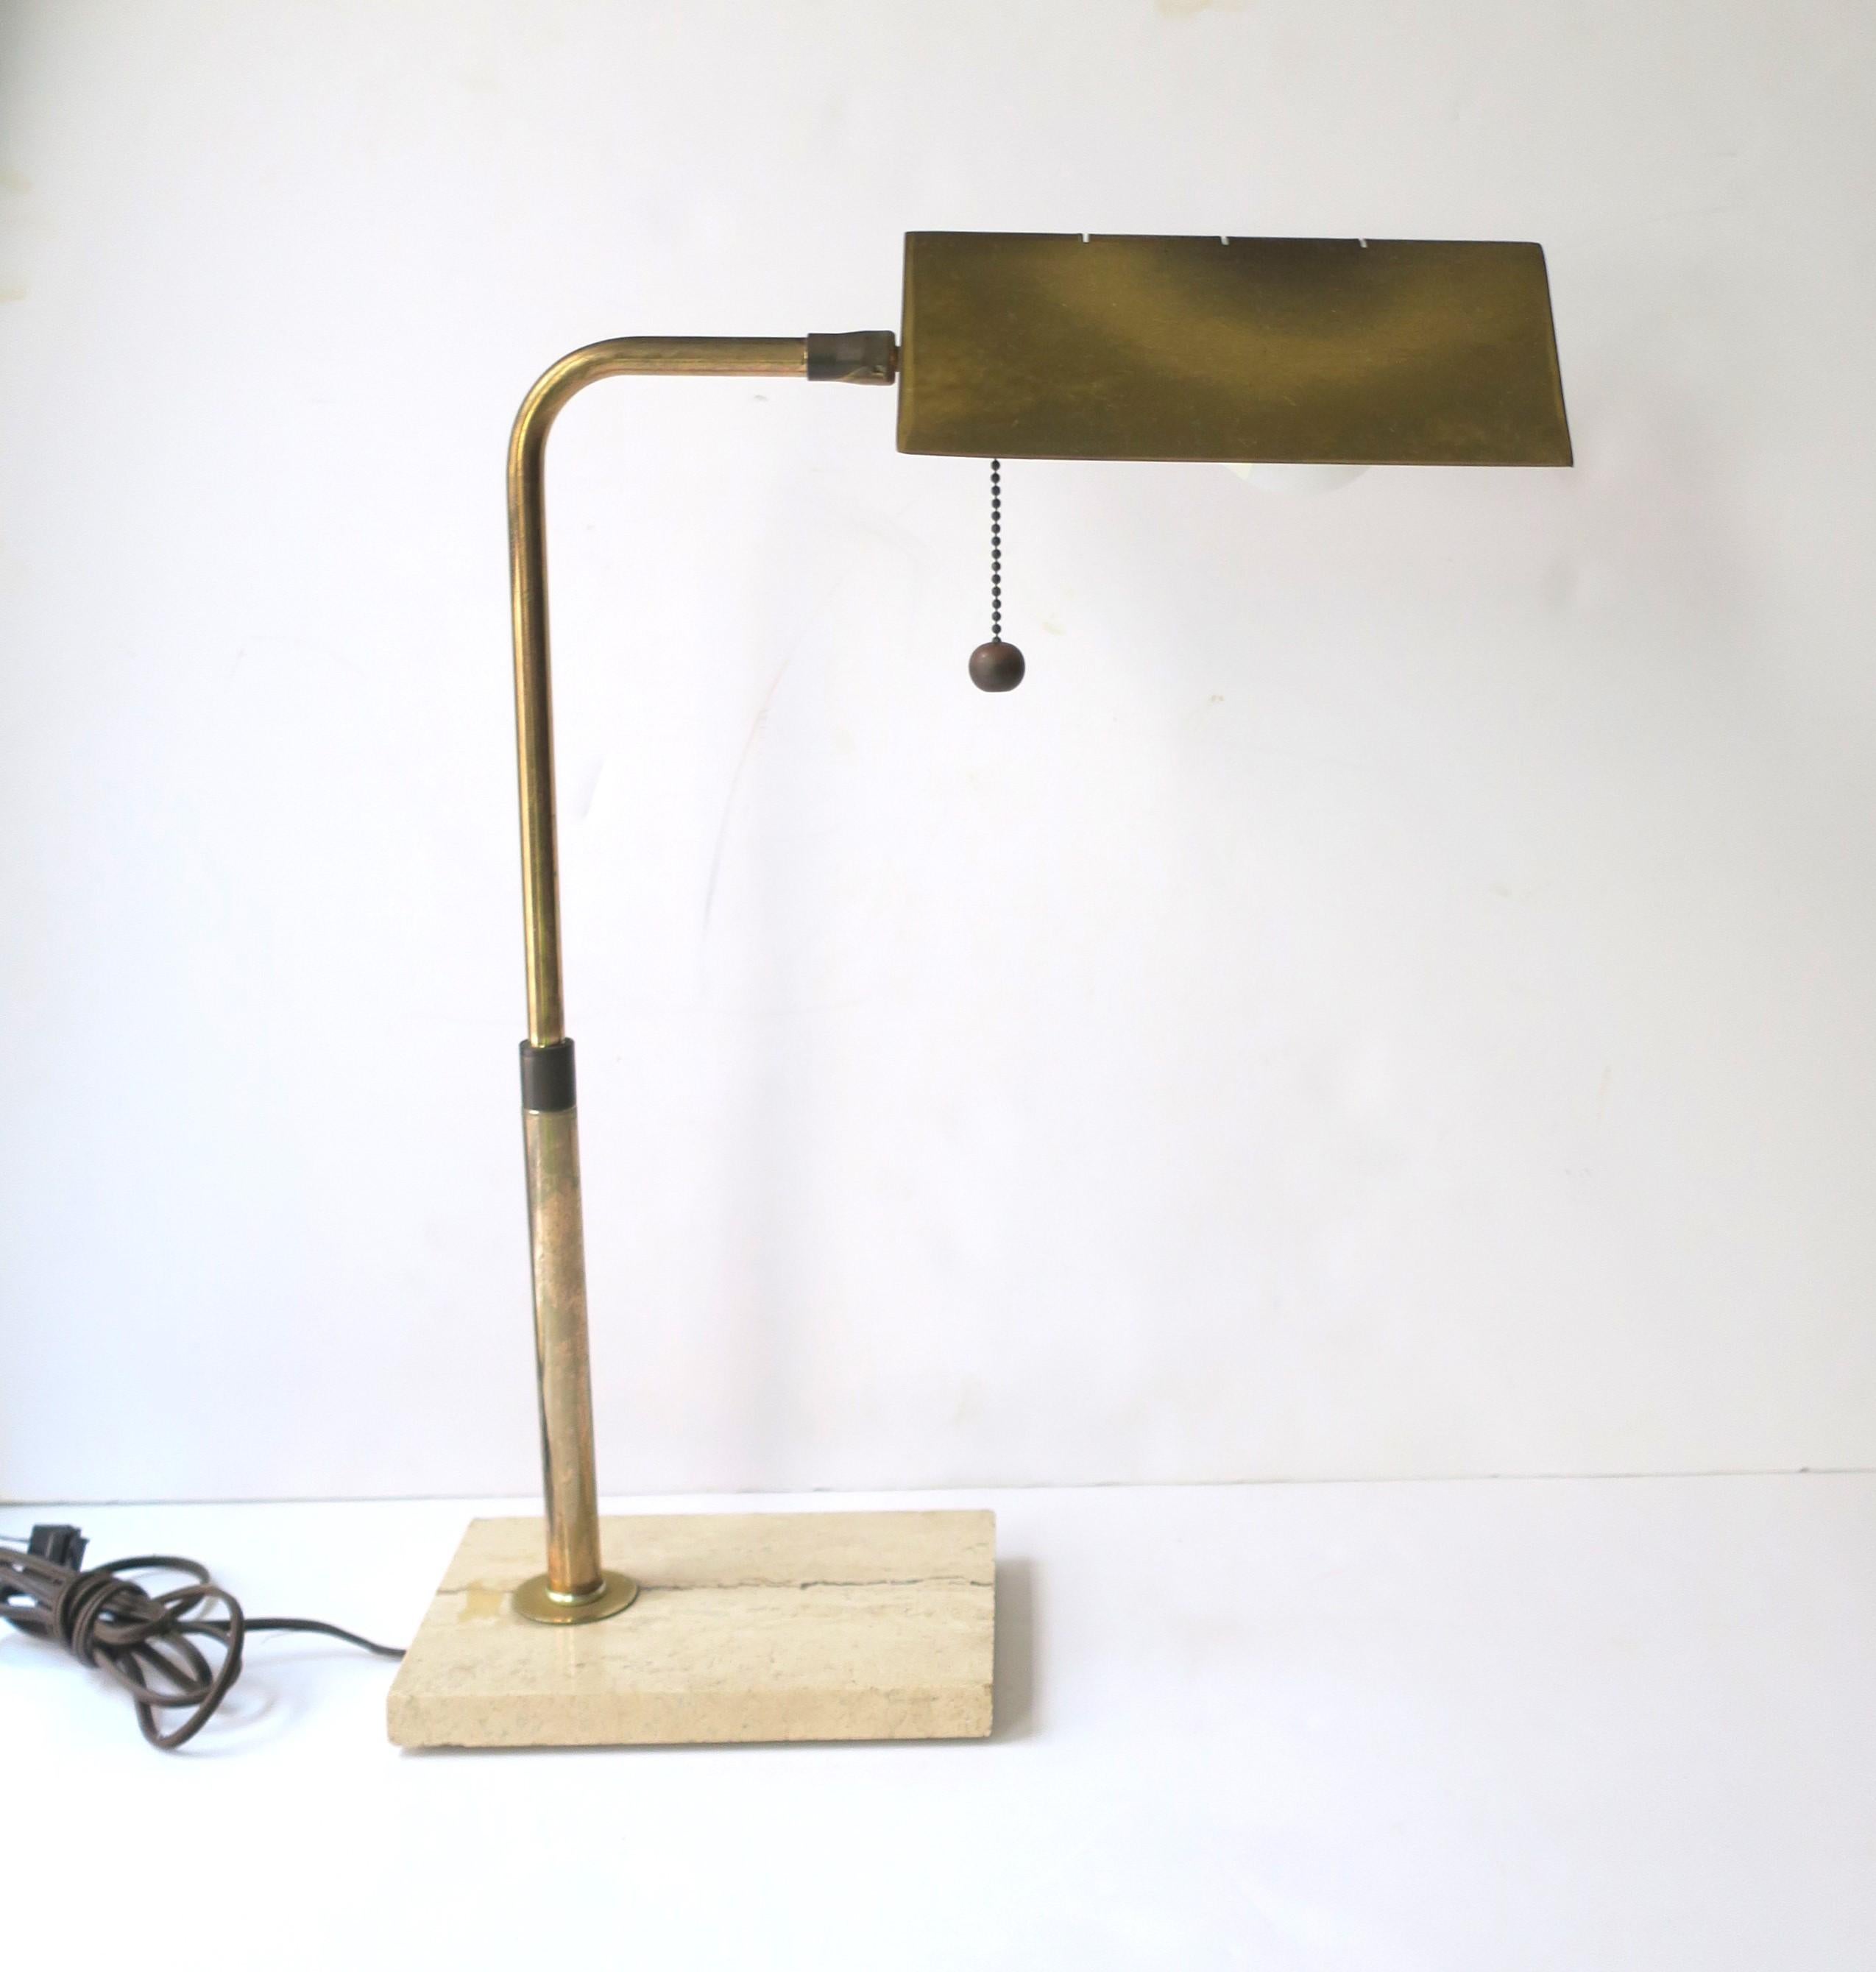 Italian Brass and Travertine Marble Desk or Table Lamp, circa 1960s 1970s For Sale 4